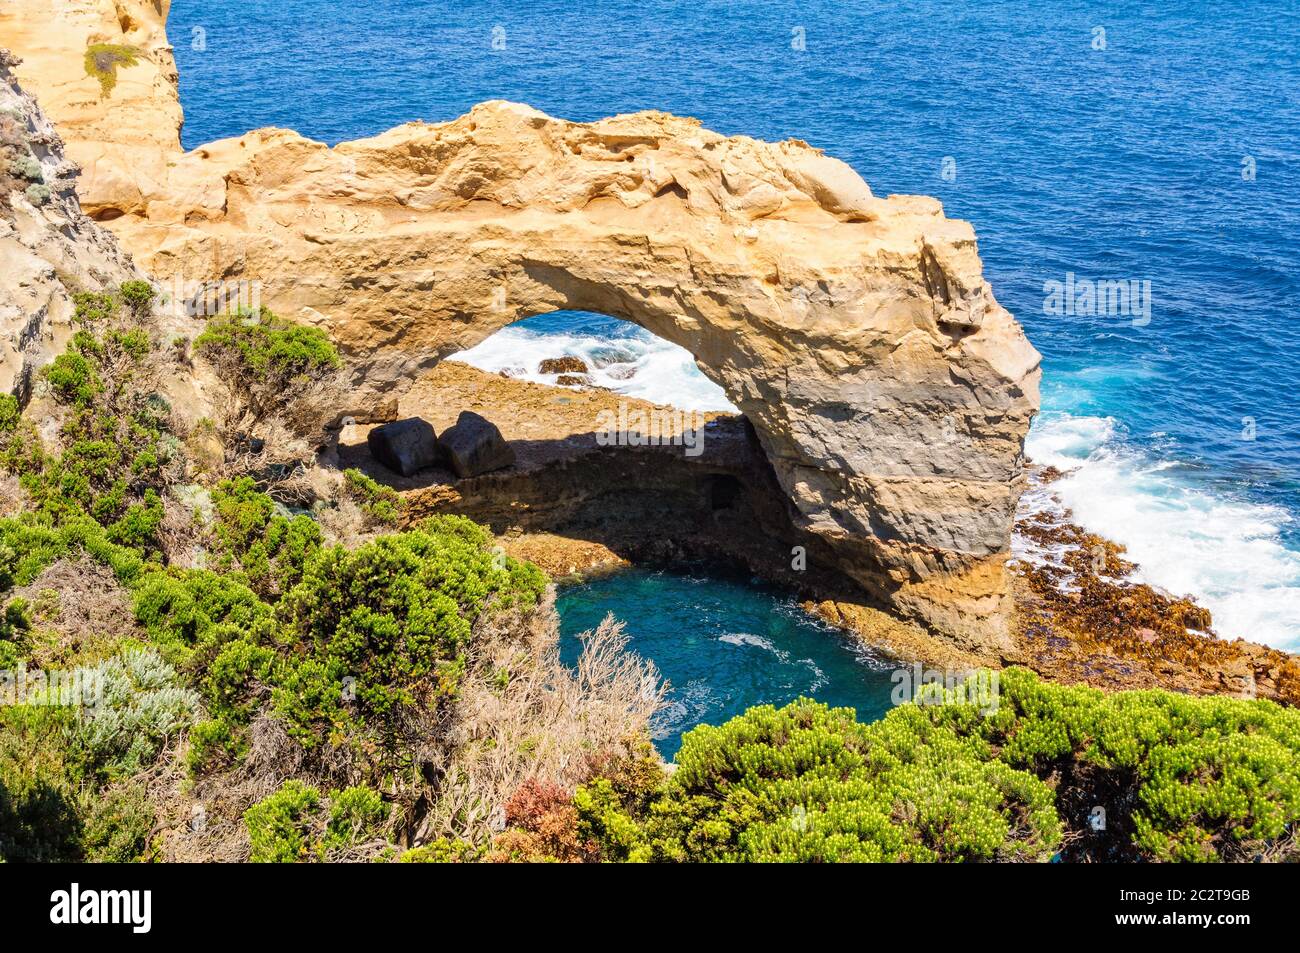 This naturally sculptured arch stands at 8 metres high - Port Campbell, Victoria, Australia Stock Photo